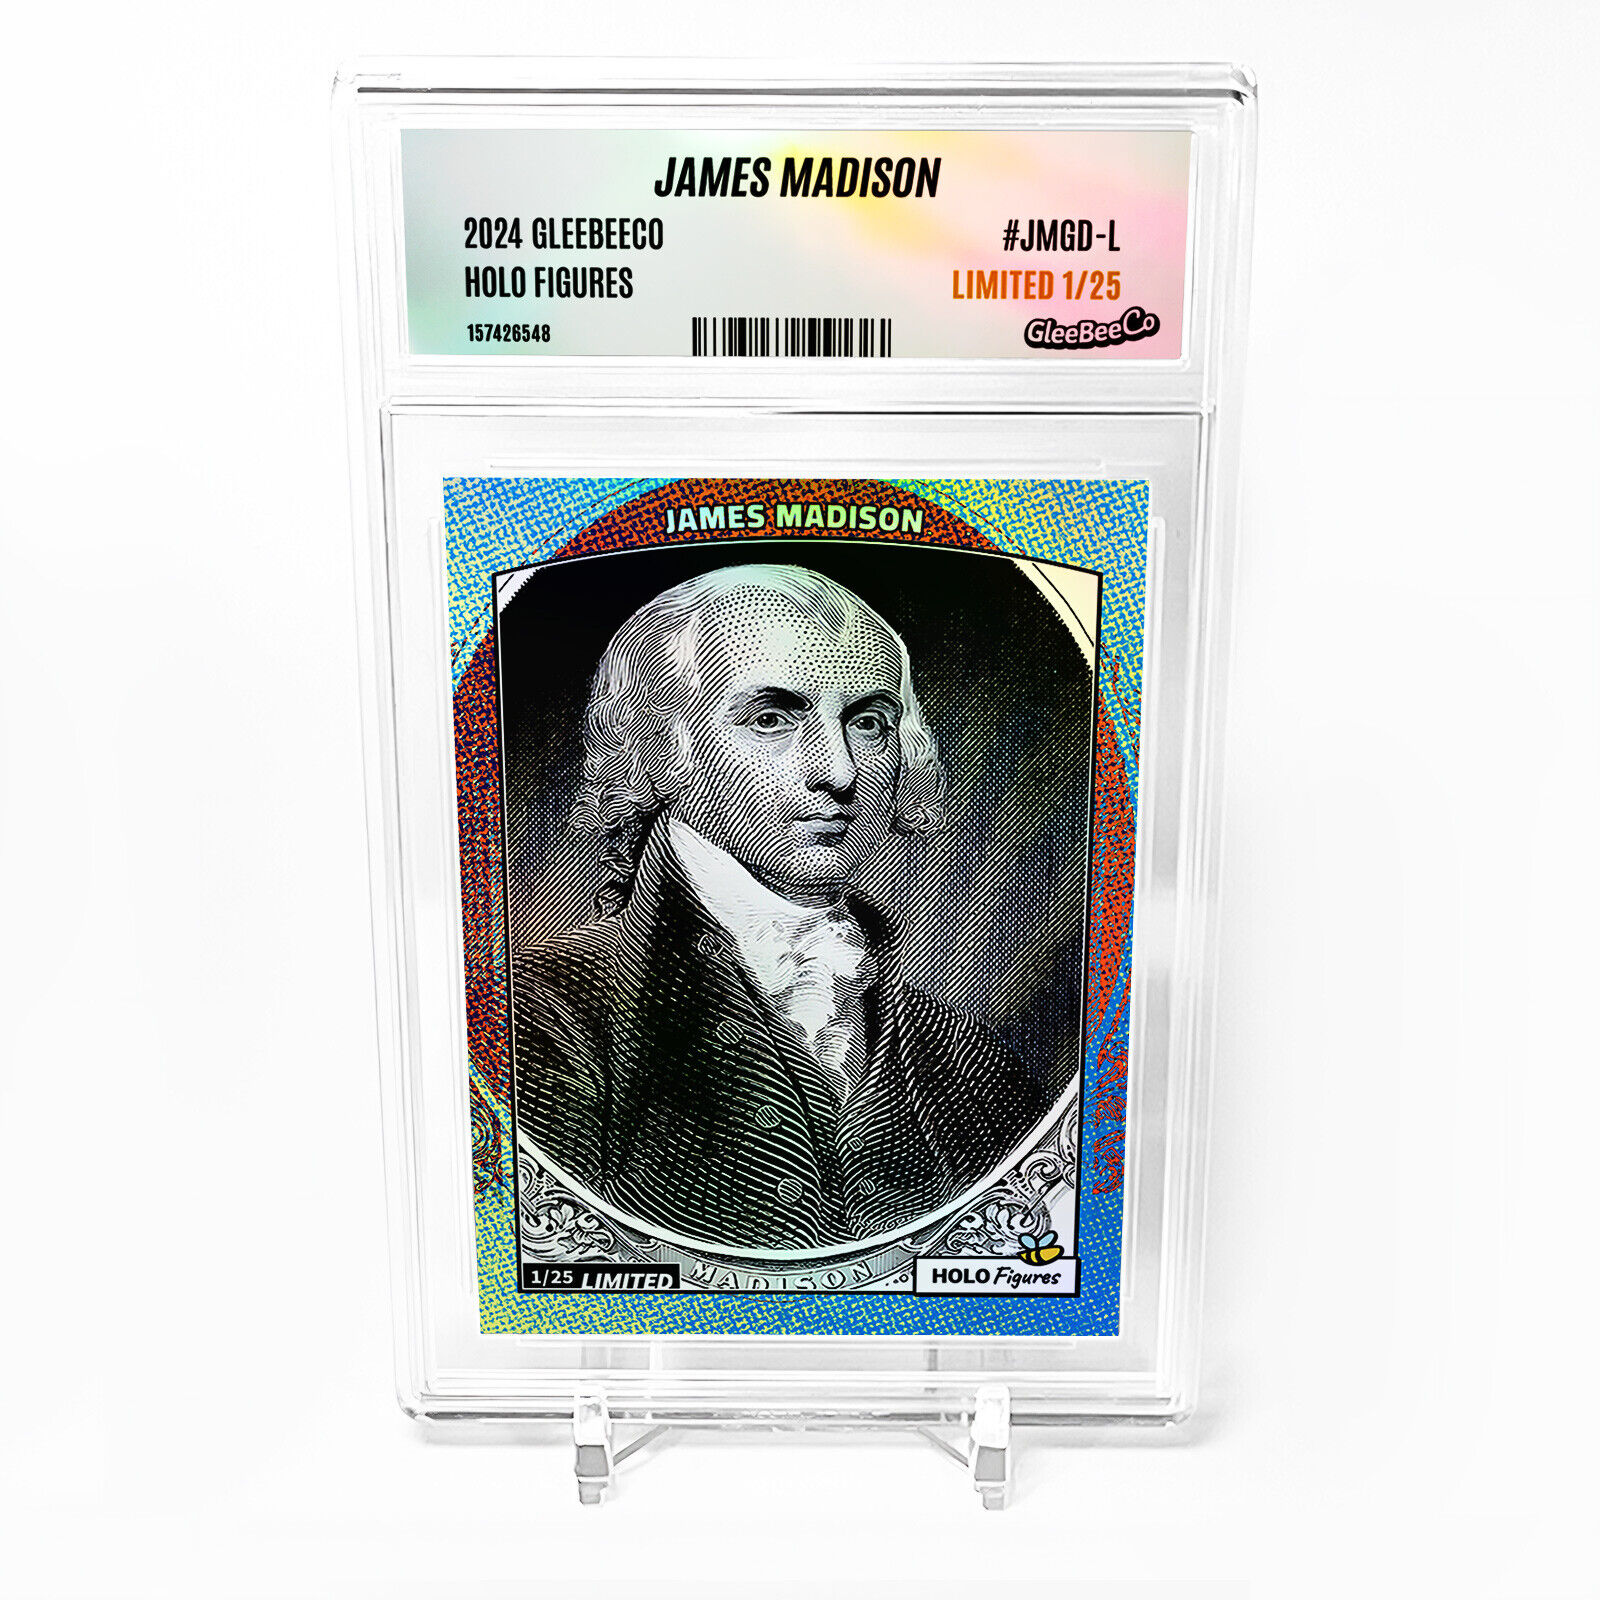 JAMES MADISON Holographic Card 2024 GleeBeeCo #JMGD-L LIMITED to /25